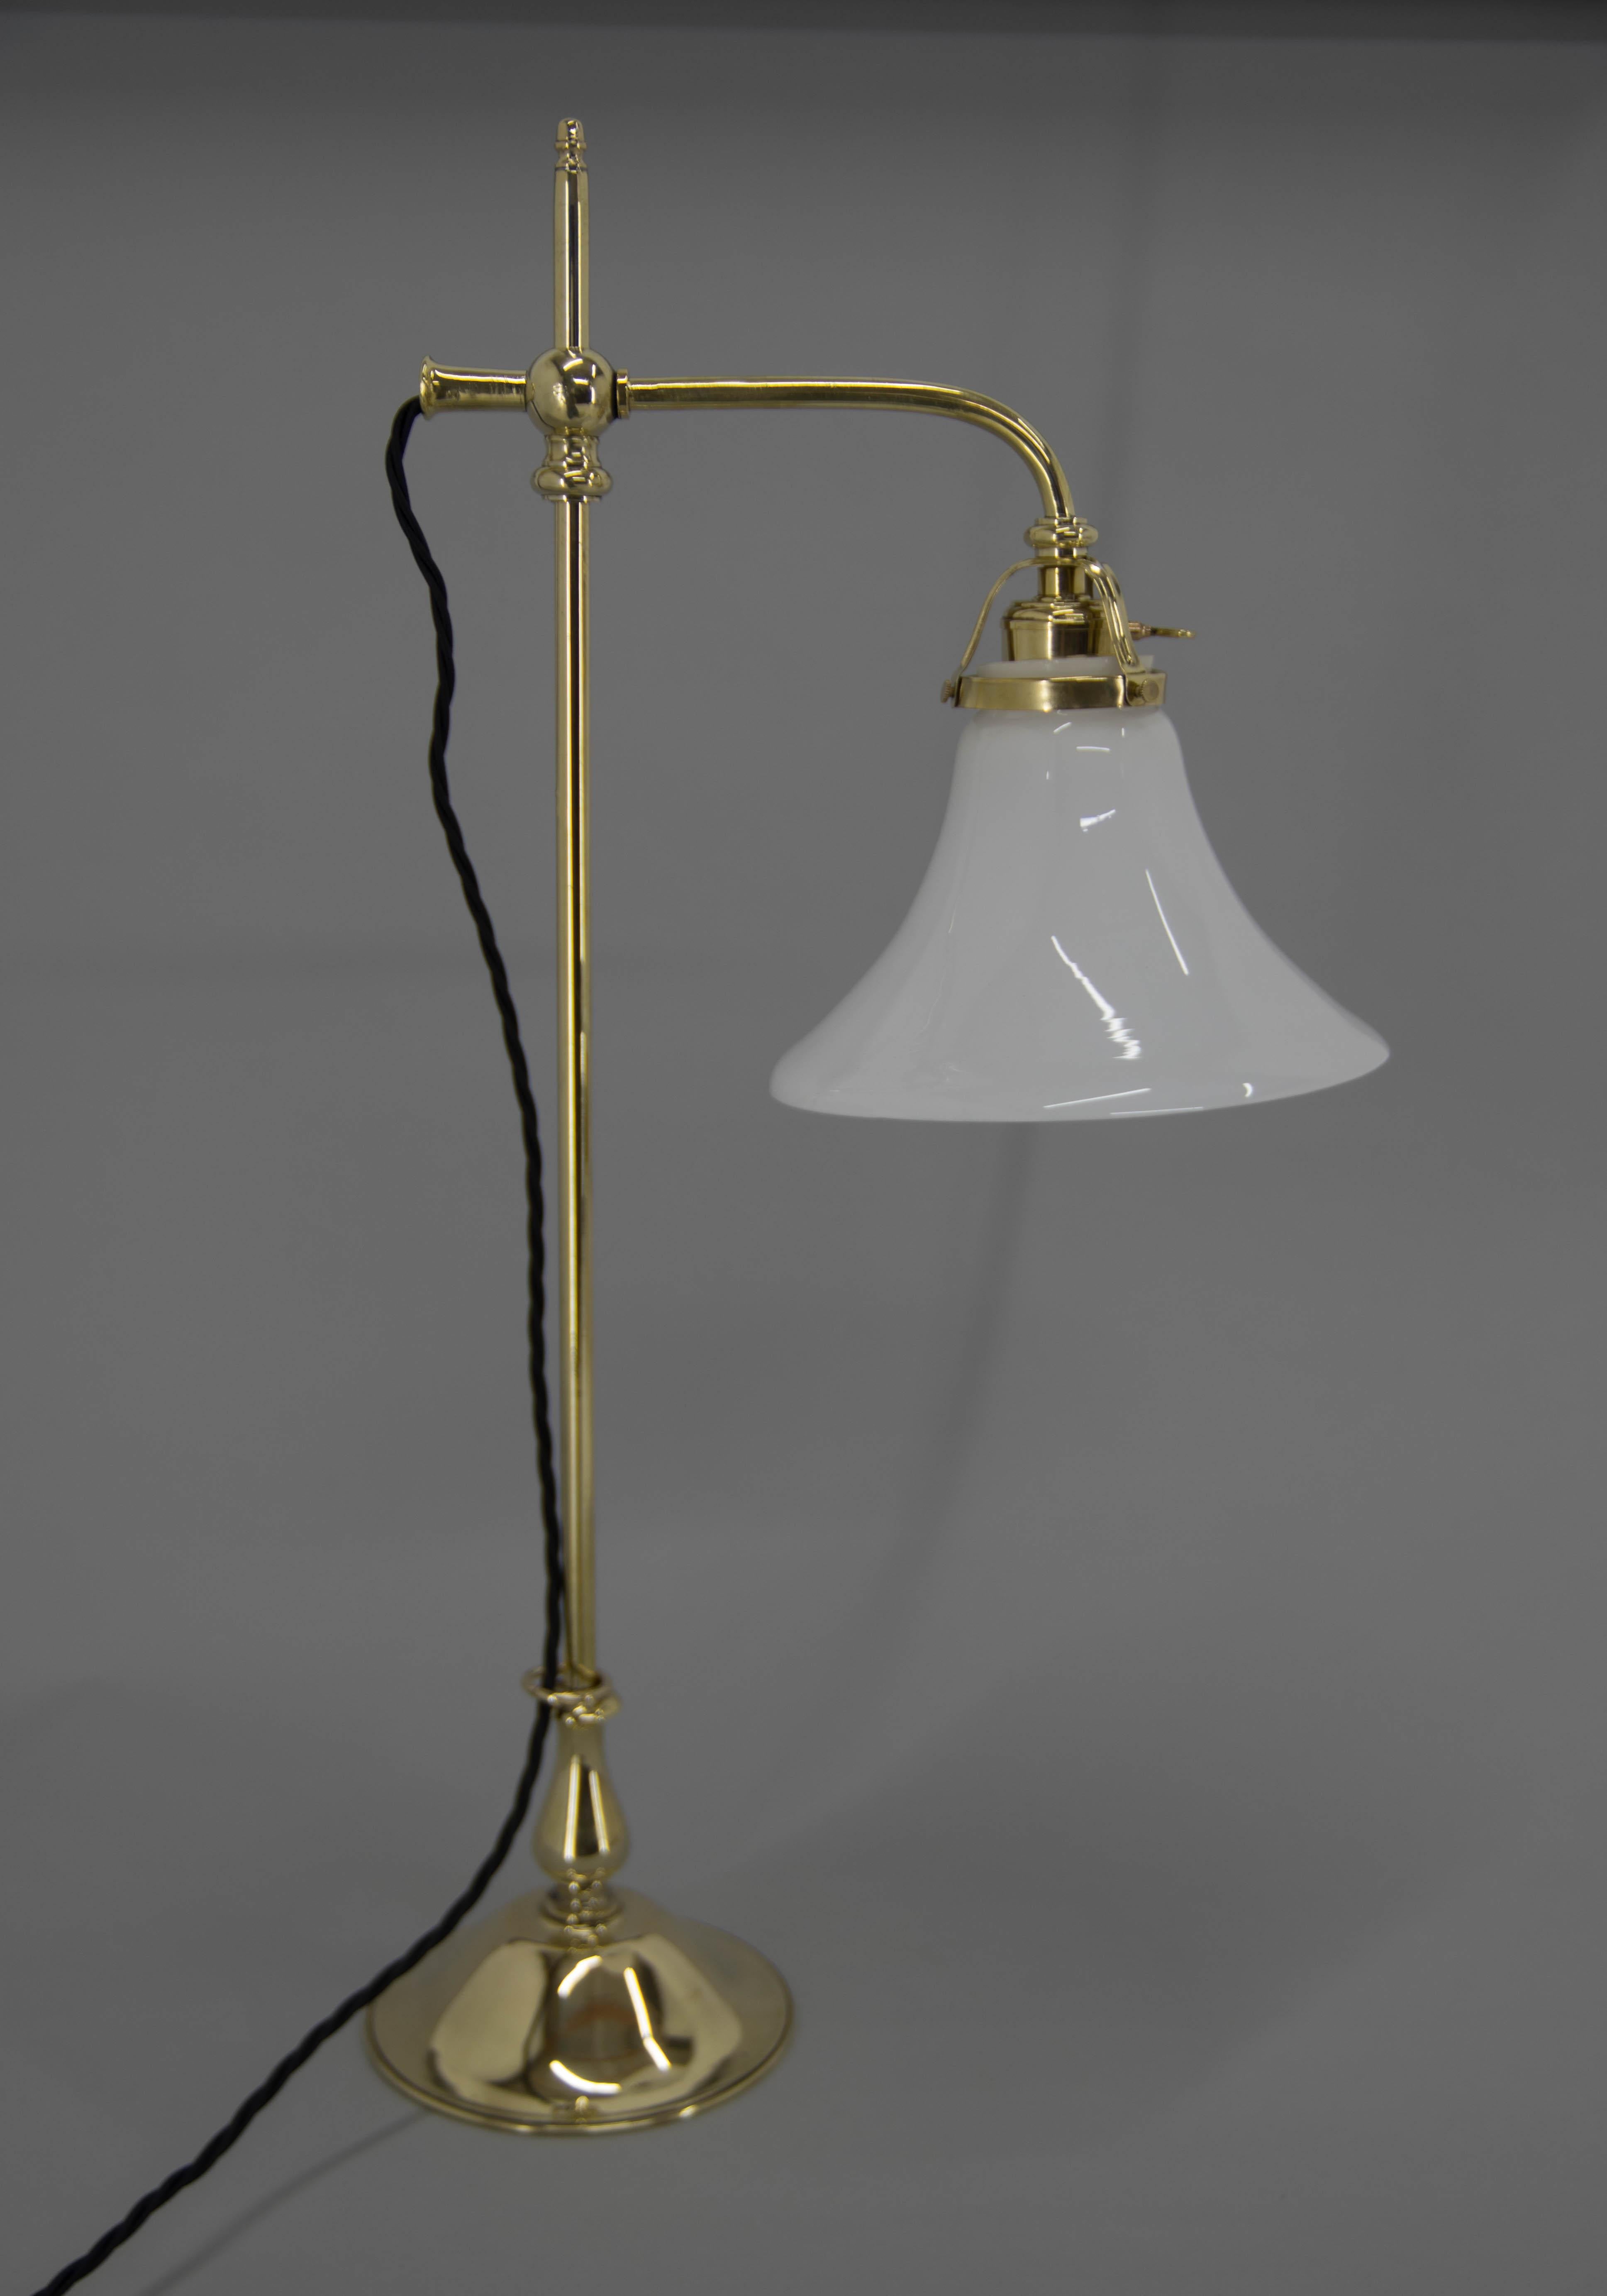 Beautiful Art Nouveau table lamp.
Completely restored, brass refinished
Rewired. 1x40W, E25-E27 bulb
US plug adapter included.